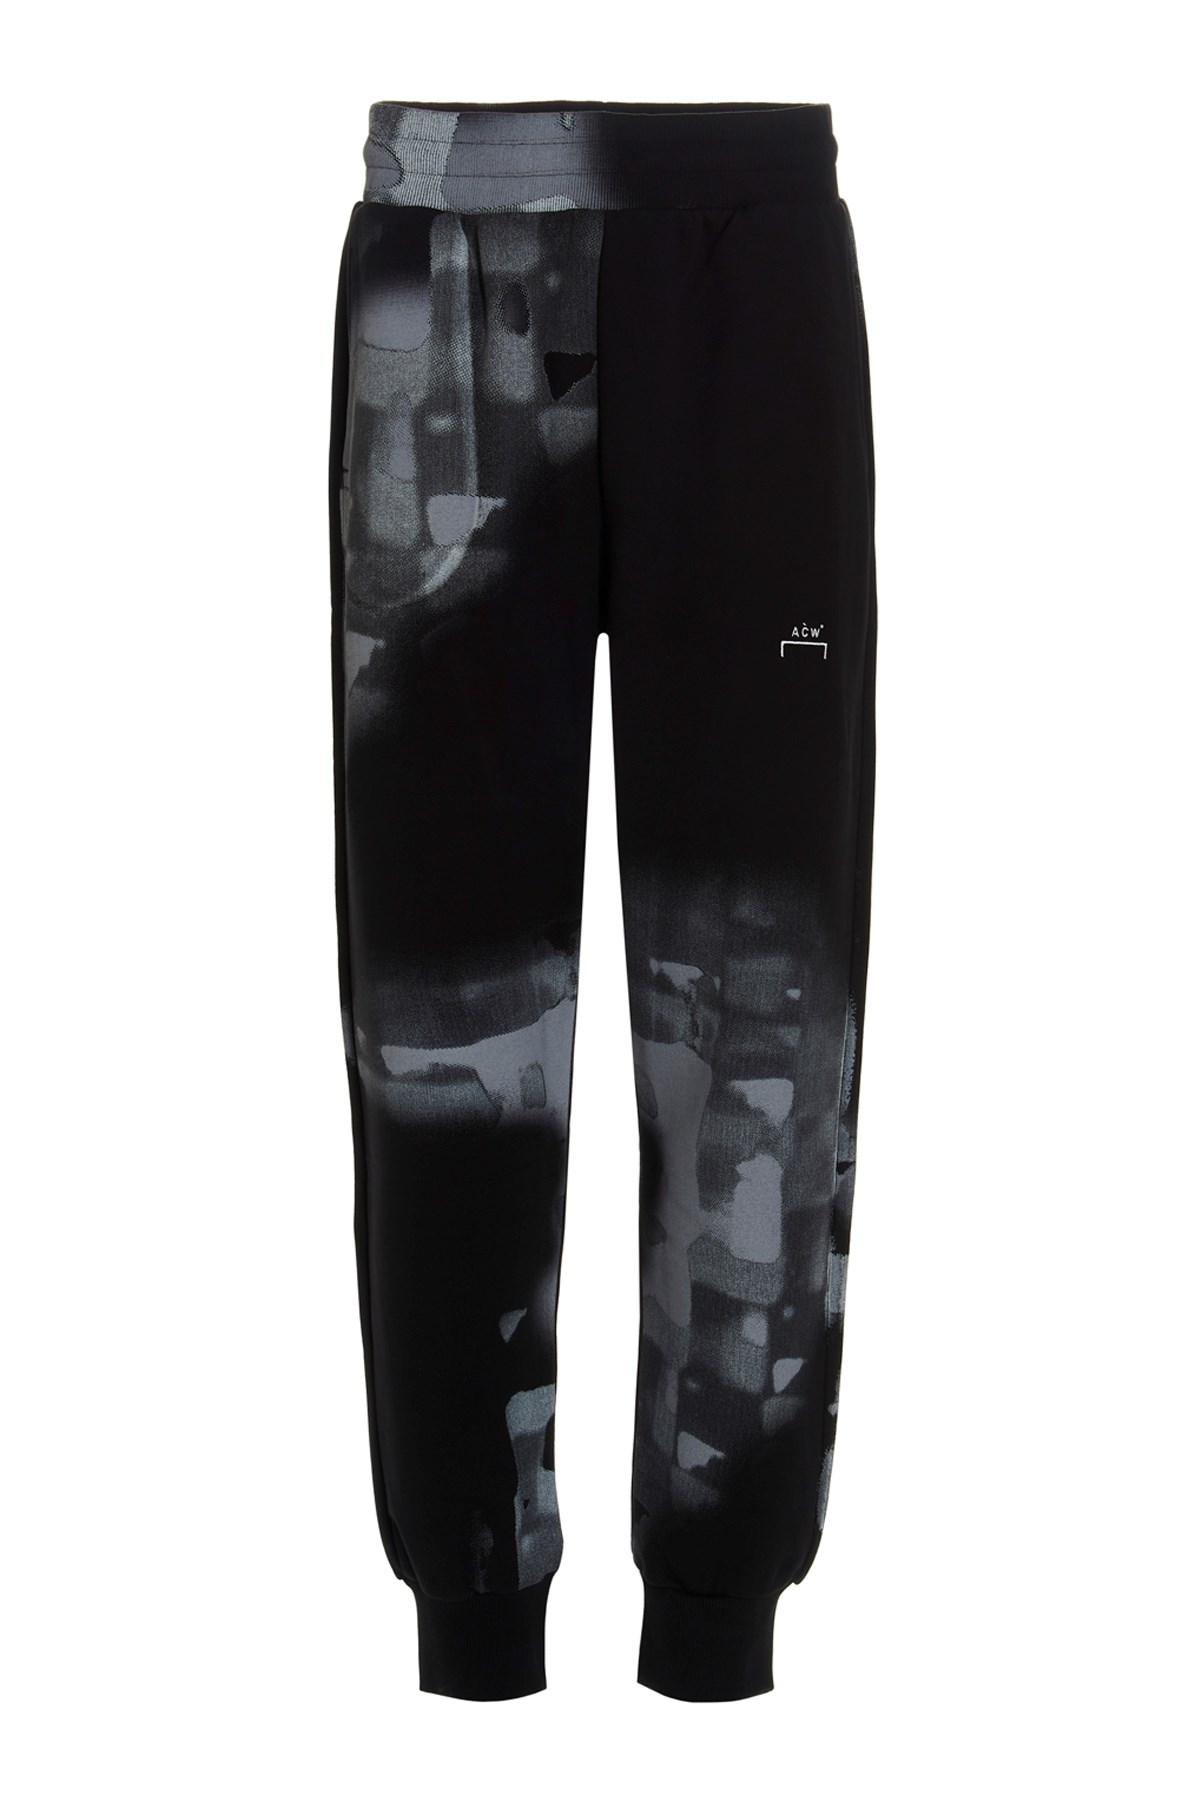 A-COLD-WALL* 'Brush Stroke’ Joggers